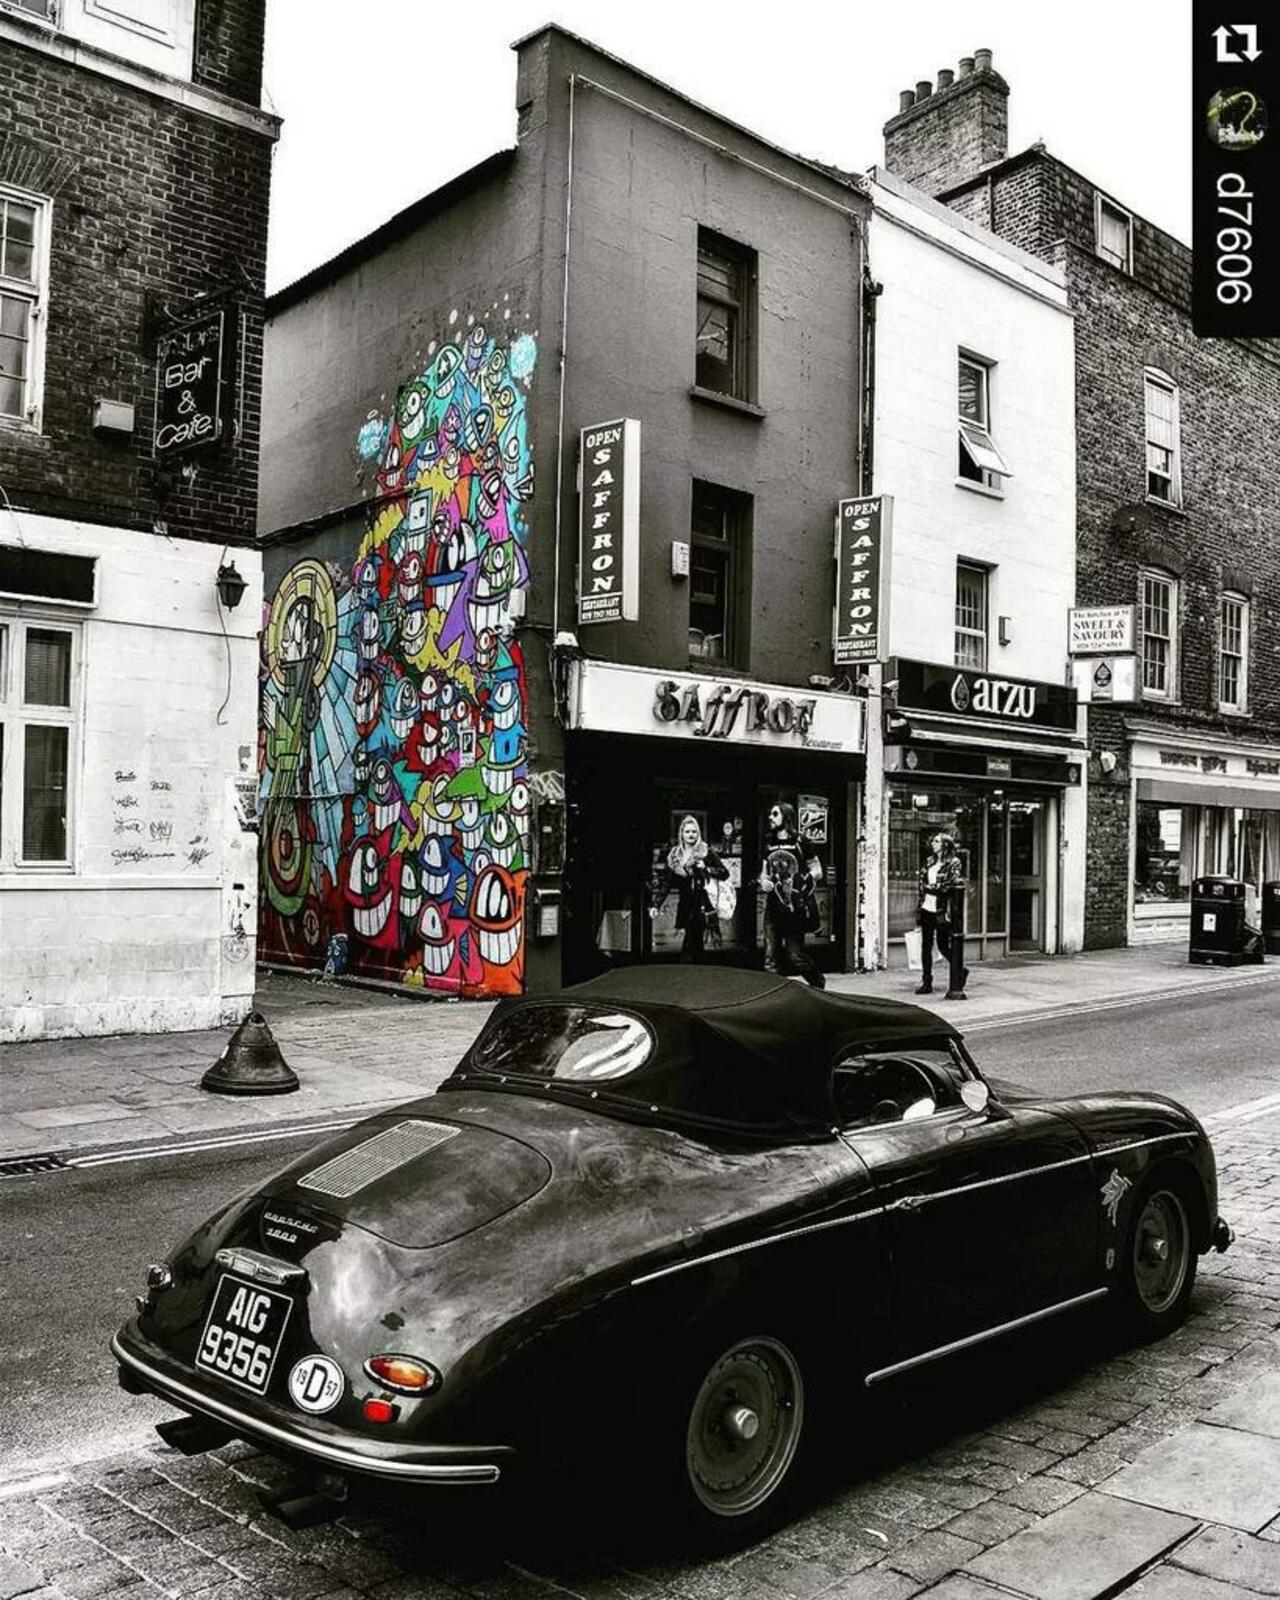 Love this photo.

#London #Graffiti
Photo by @xapictures
#StreetArt 
#ColourOnGrayscale http://t.co/RsRv6oW84k